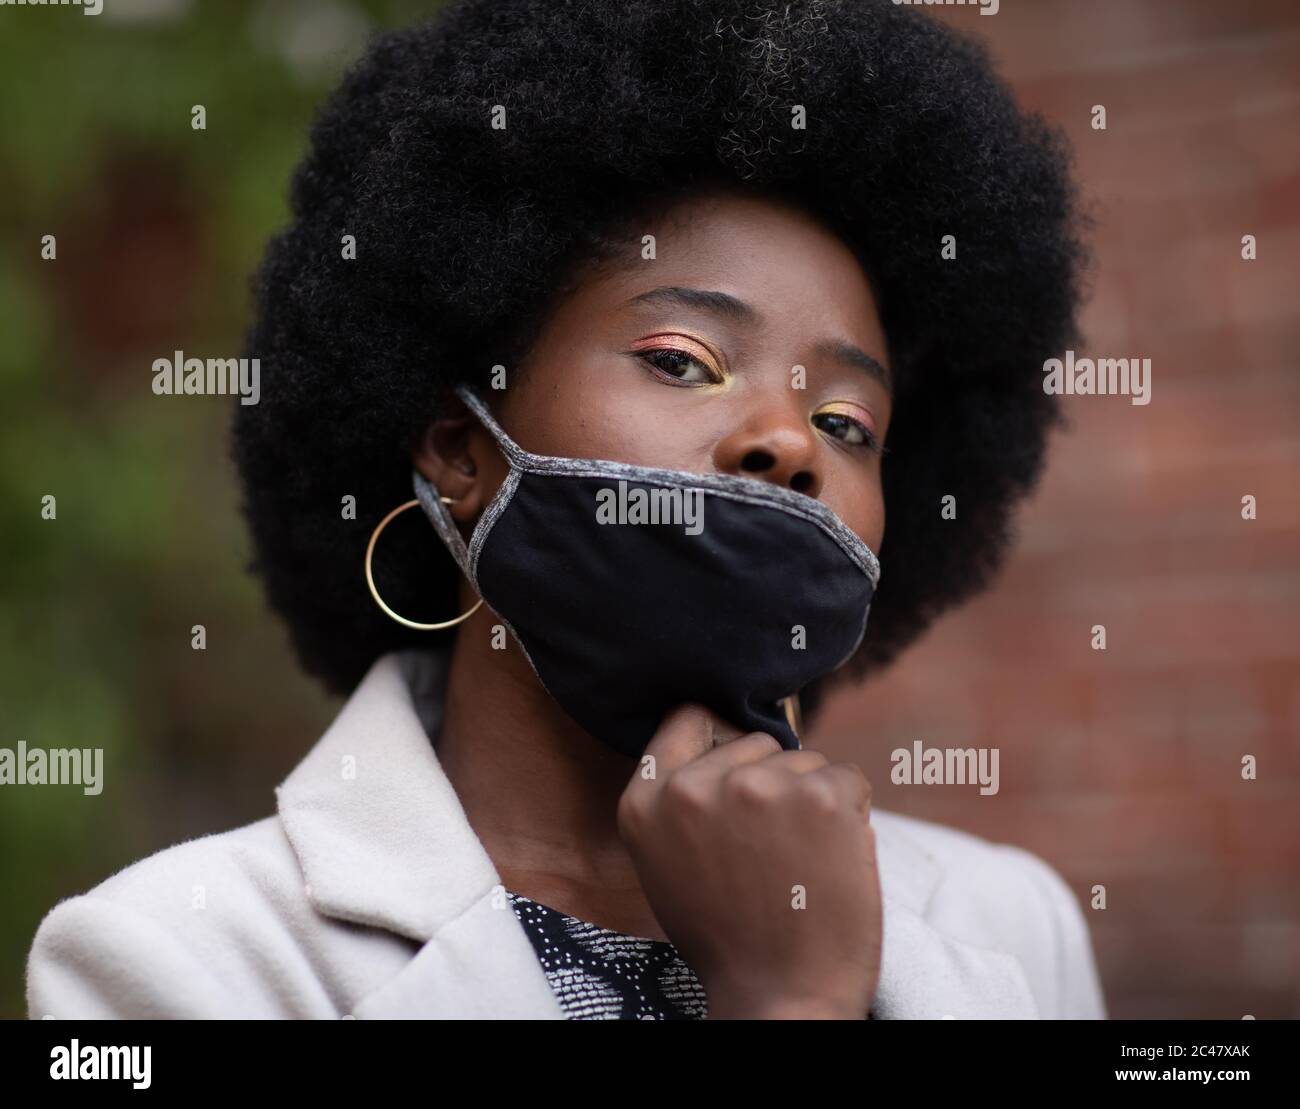 Black self-confident woman pulling down her face mask. Face covering is mandatory to wear in public during the COVID-19 pandemic. Stock Photo